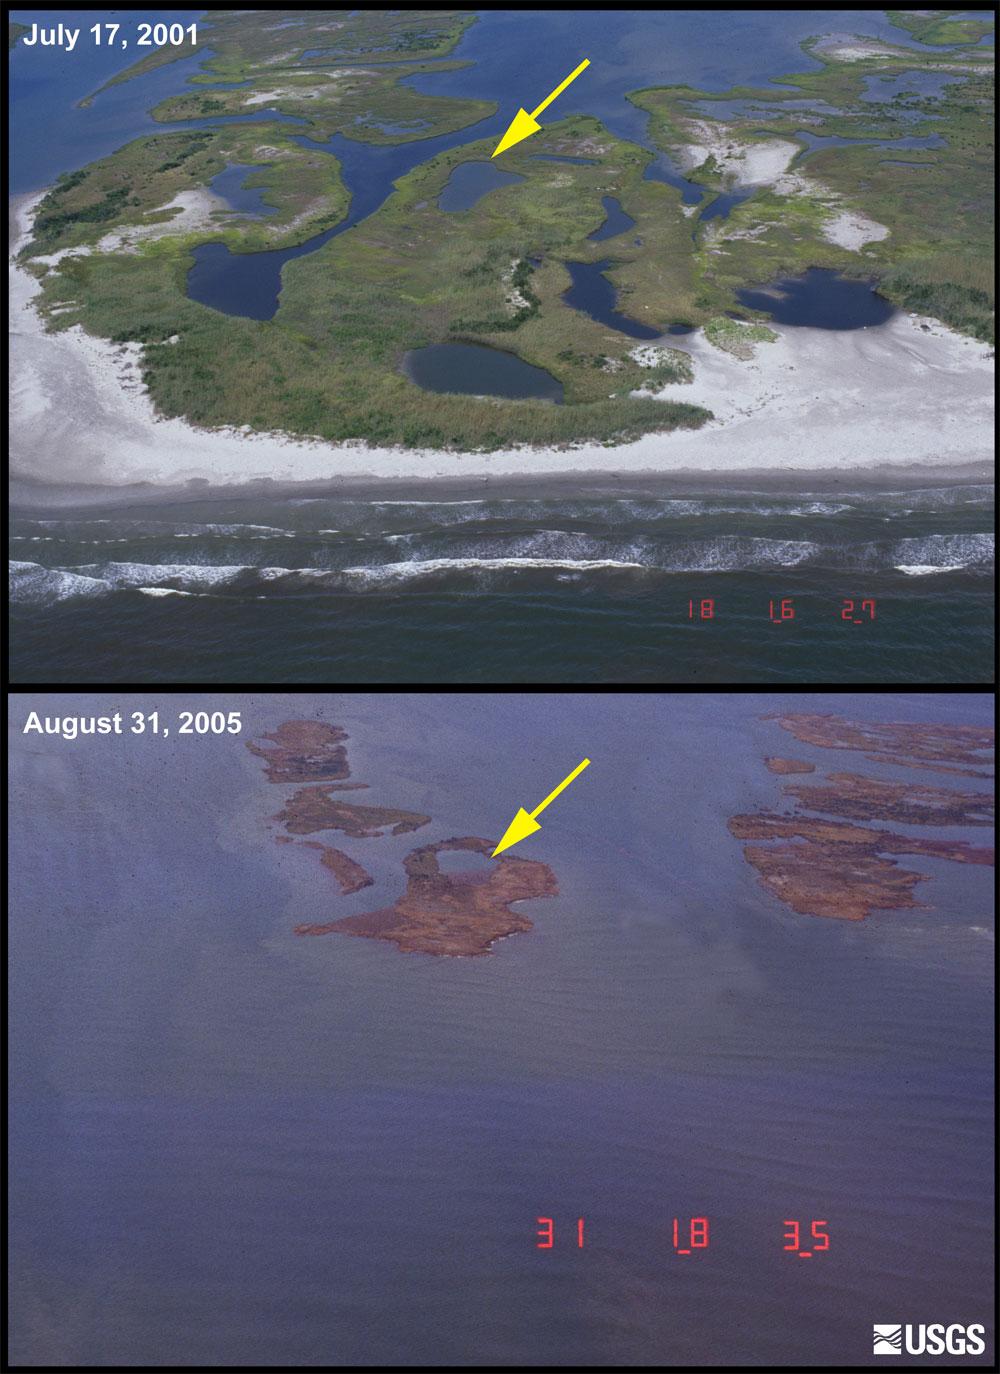 Dynamic Environment: Chandelier Islands; before and after Katrina Wave erosion stripped off sandy